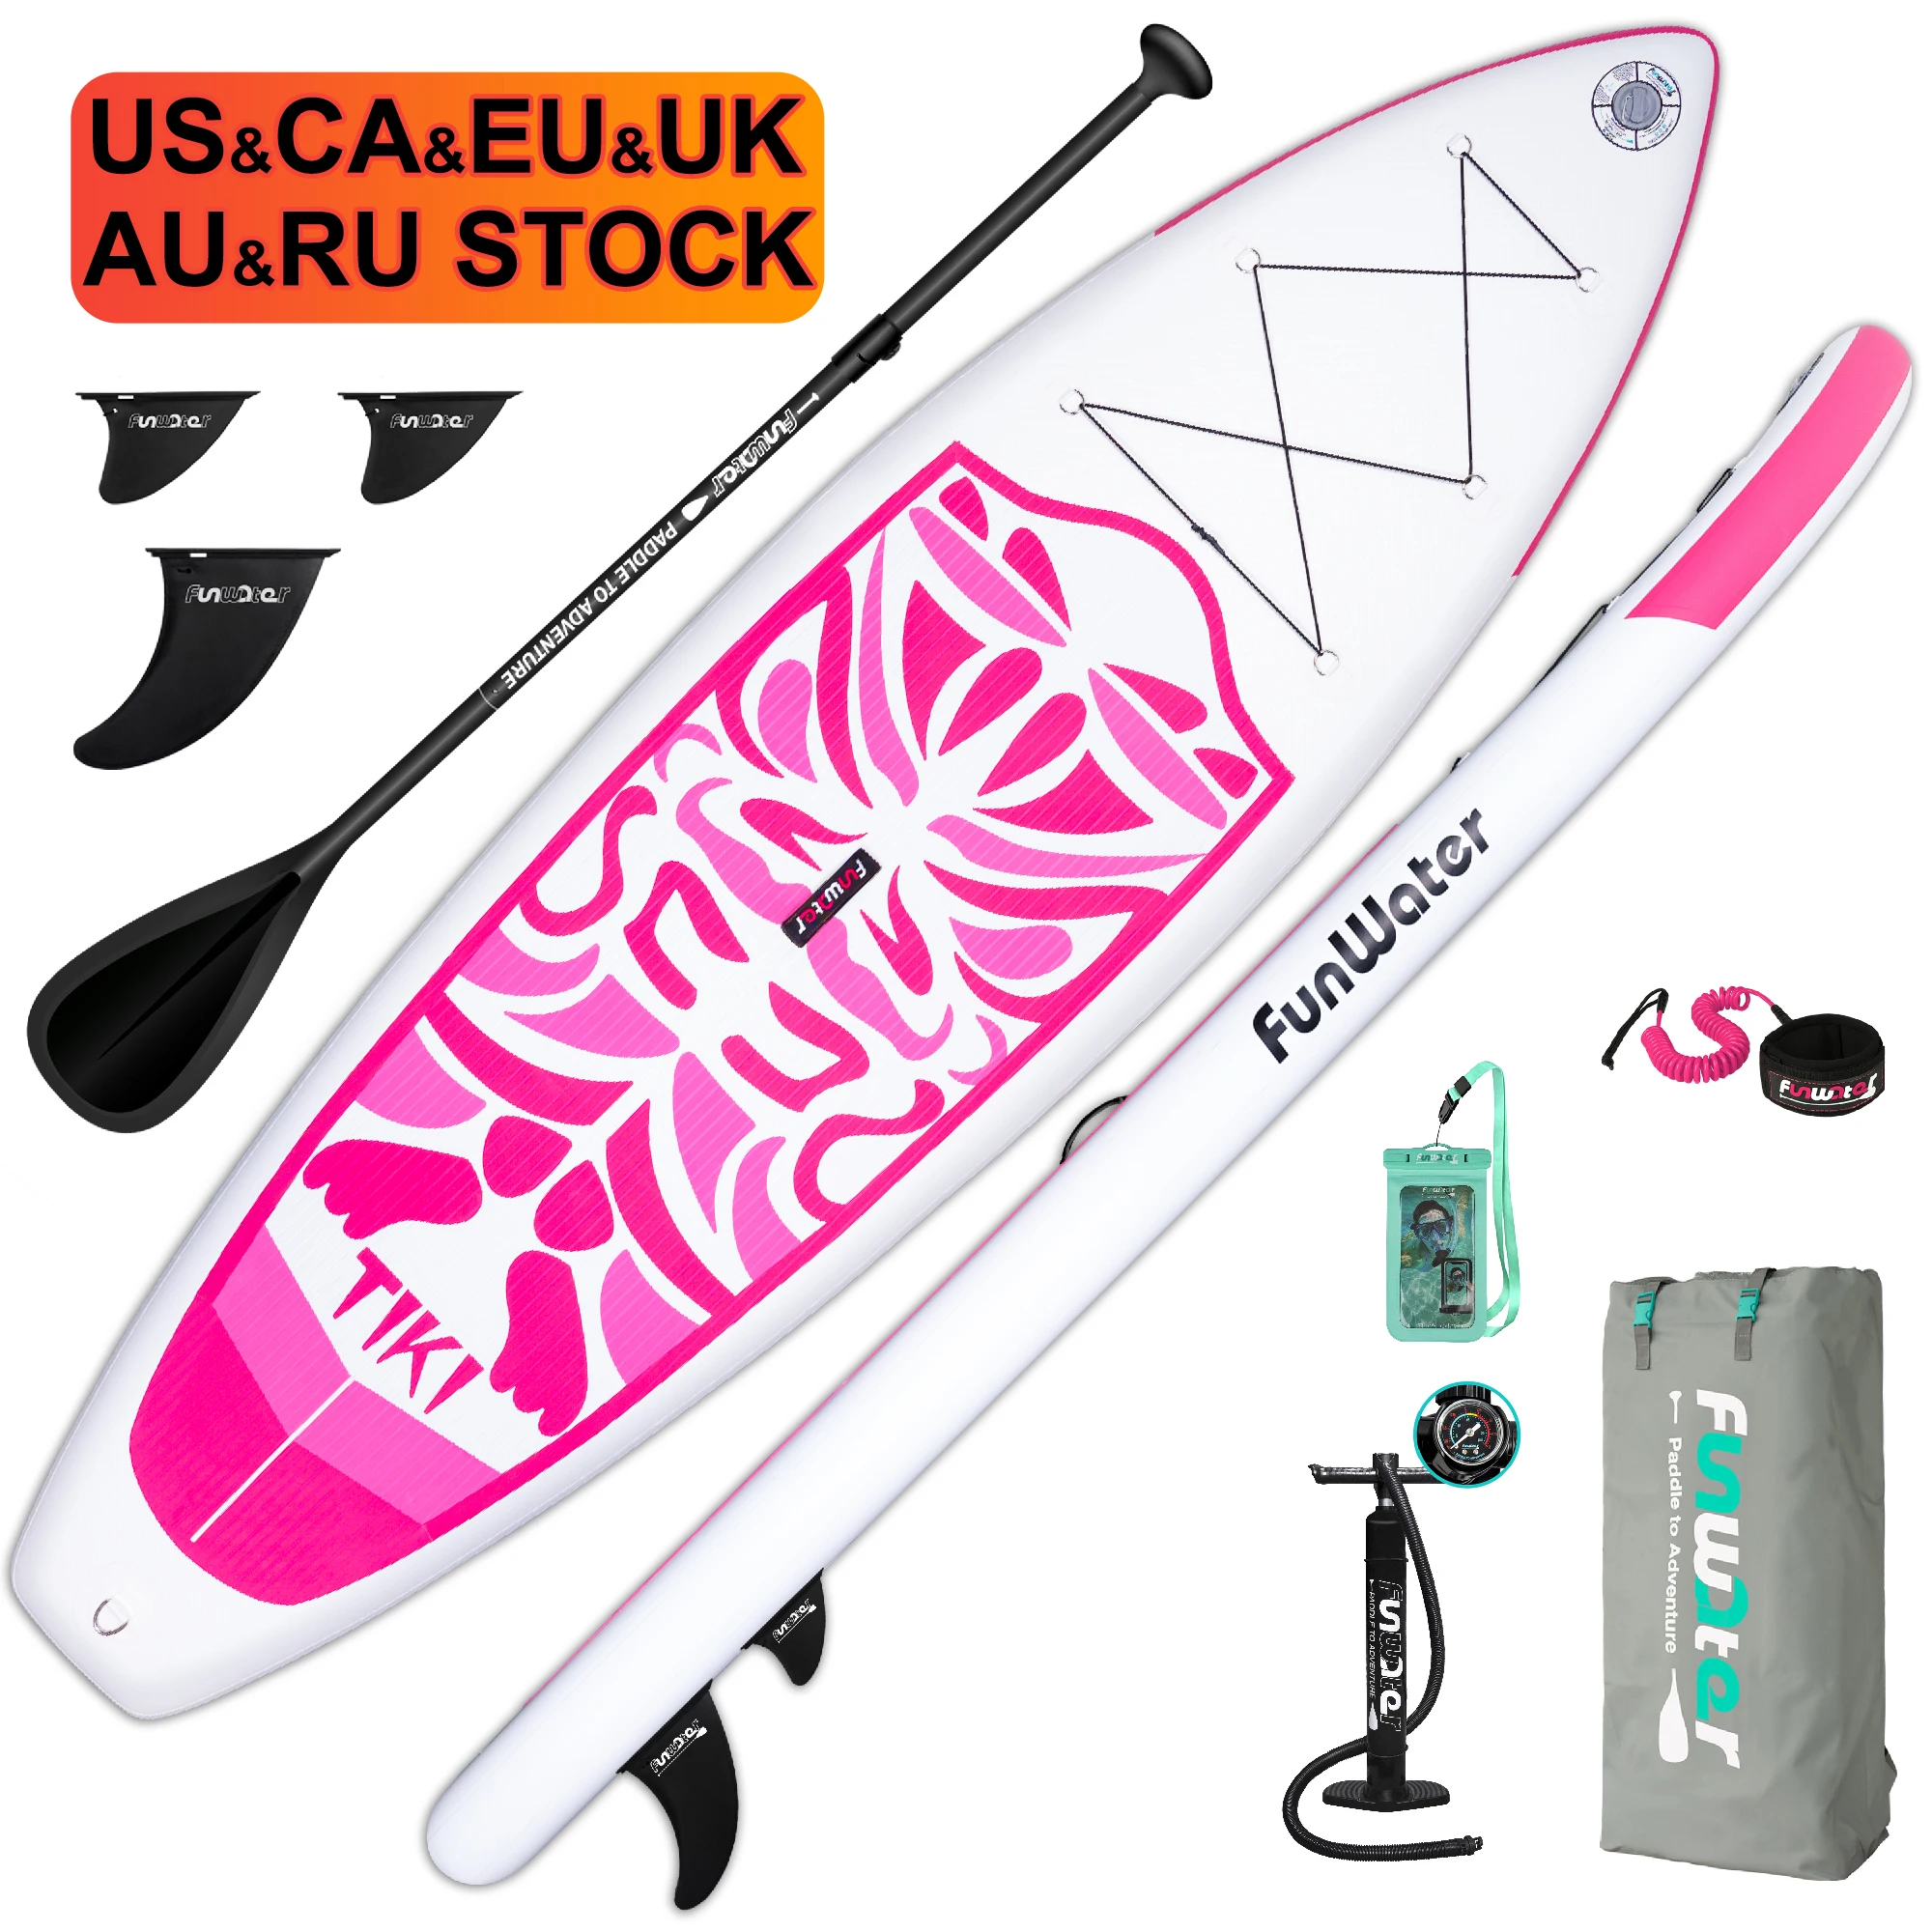 FUNWATER Dropshipping OEM Wholesale superfield Portable Stand Up Paddle Board sup tabla de padel surf  board paddlesurf sub